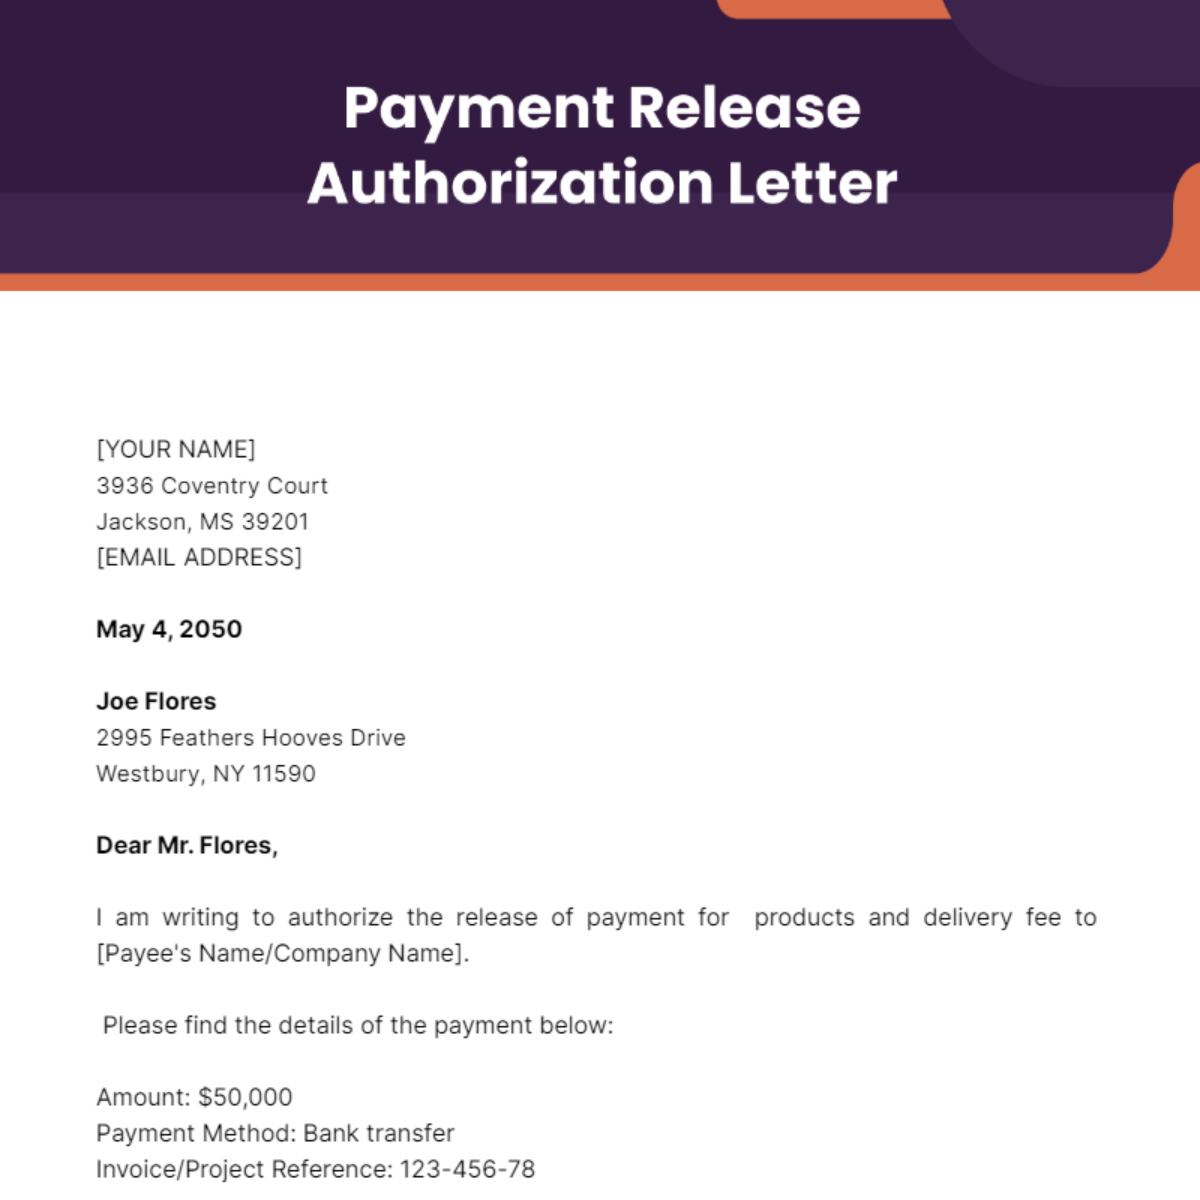 Payment Release Authorization Letter Template